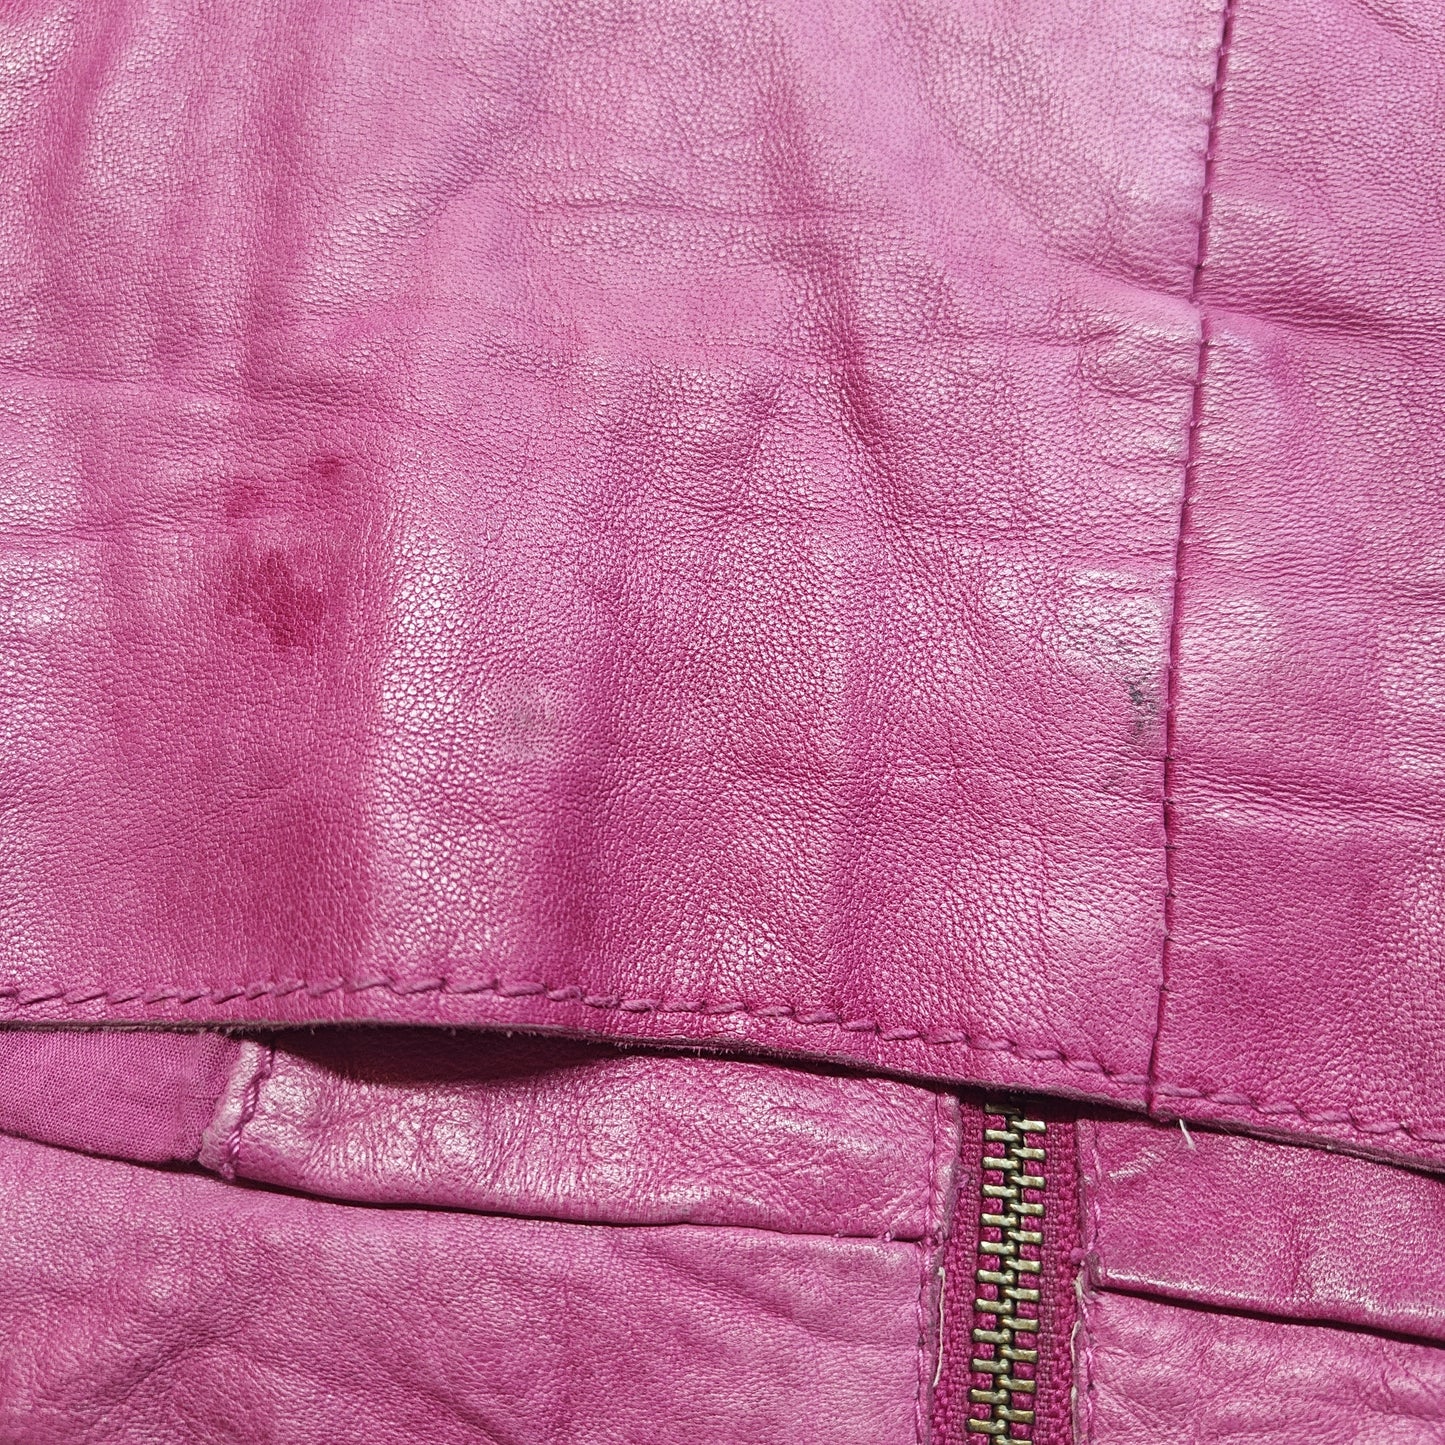 Trapper Queens Pink Clamor Lamb Leather Jacket Women Size 40